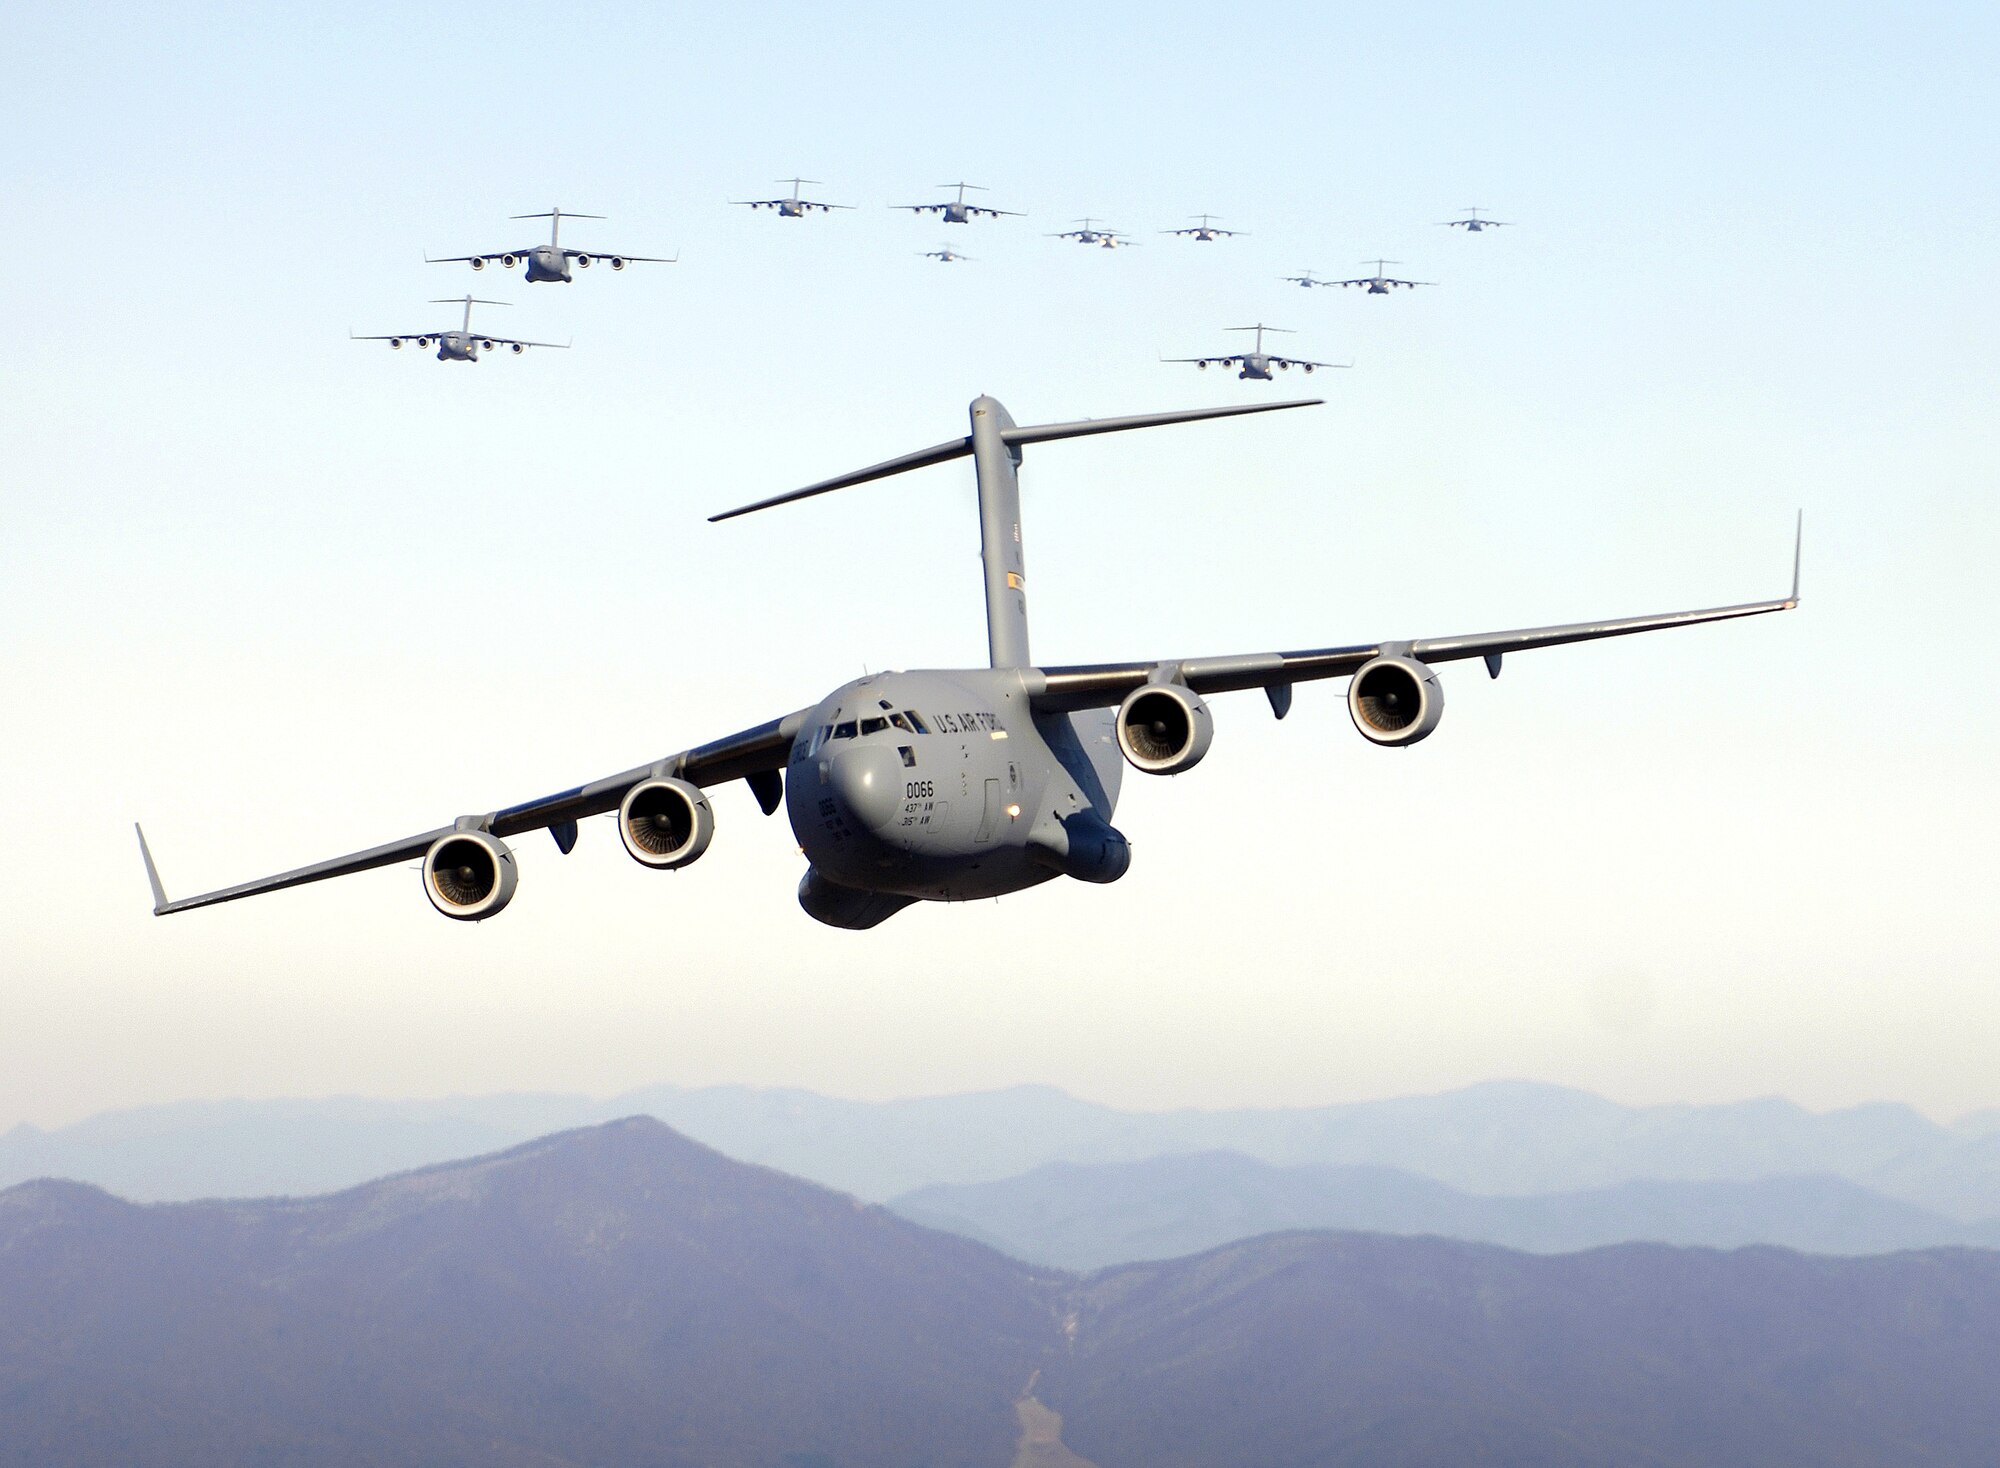 CHARLESTON, S.C. (AFPN) -- A formation of 17 C-17 Globemaster IIIs fly over the Blue Ridge Mountains in Virginia during low-level tactical training. The C-17s, assigned to the 437th and 315th Airlift Wings here, were part of the largest formation in history from a single base and demonstrated the strategic airdrop capability of the Air Force. (U.S. Air Force photo by Staff Sgt. Jacob Bailey)